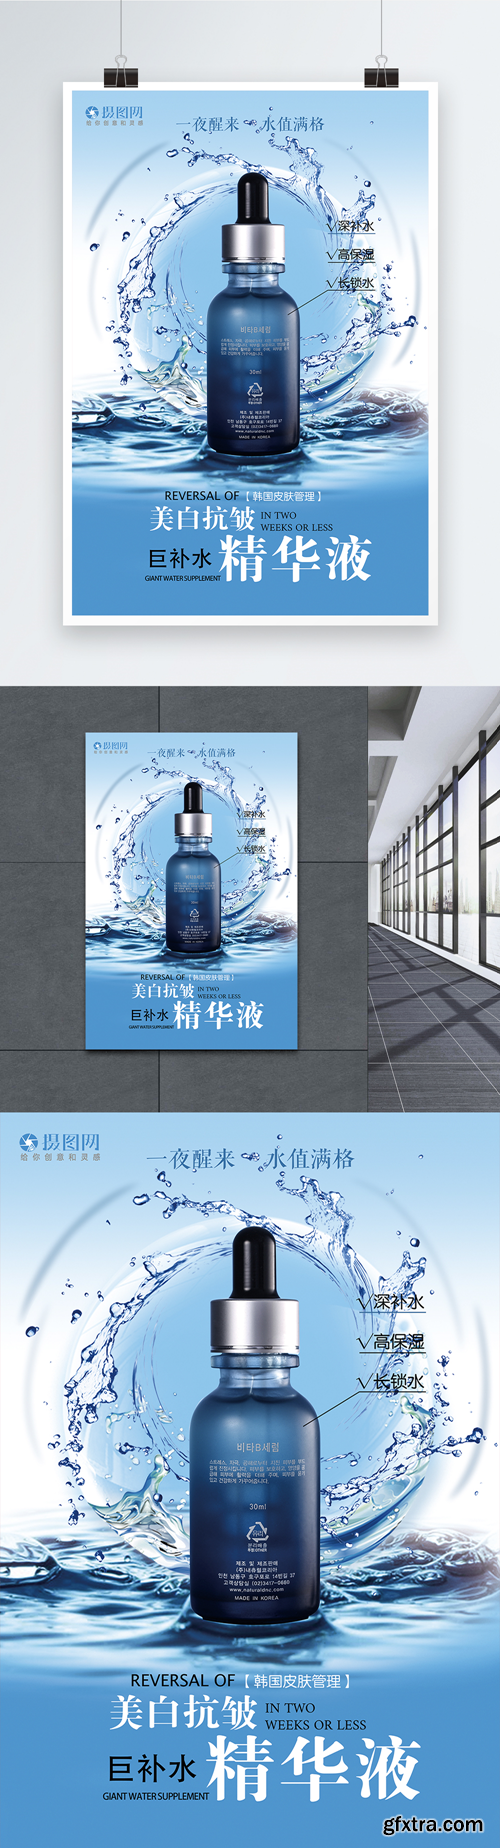 skin care beauty posters